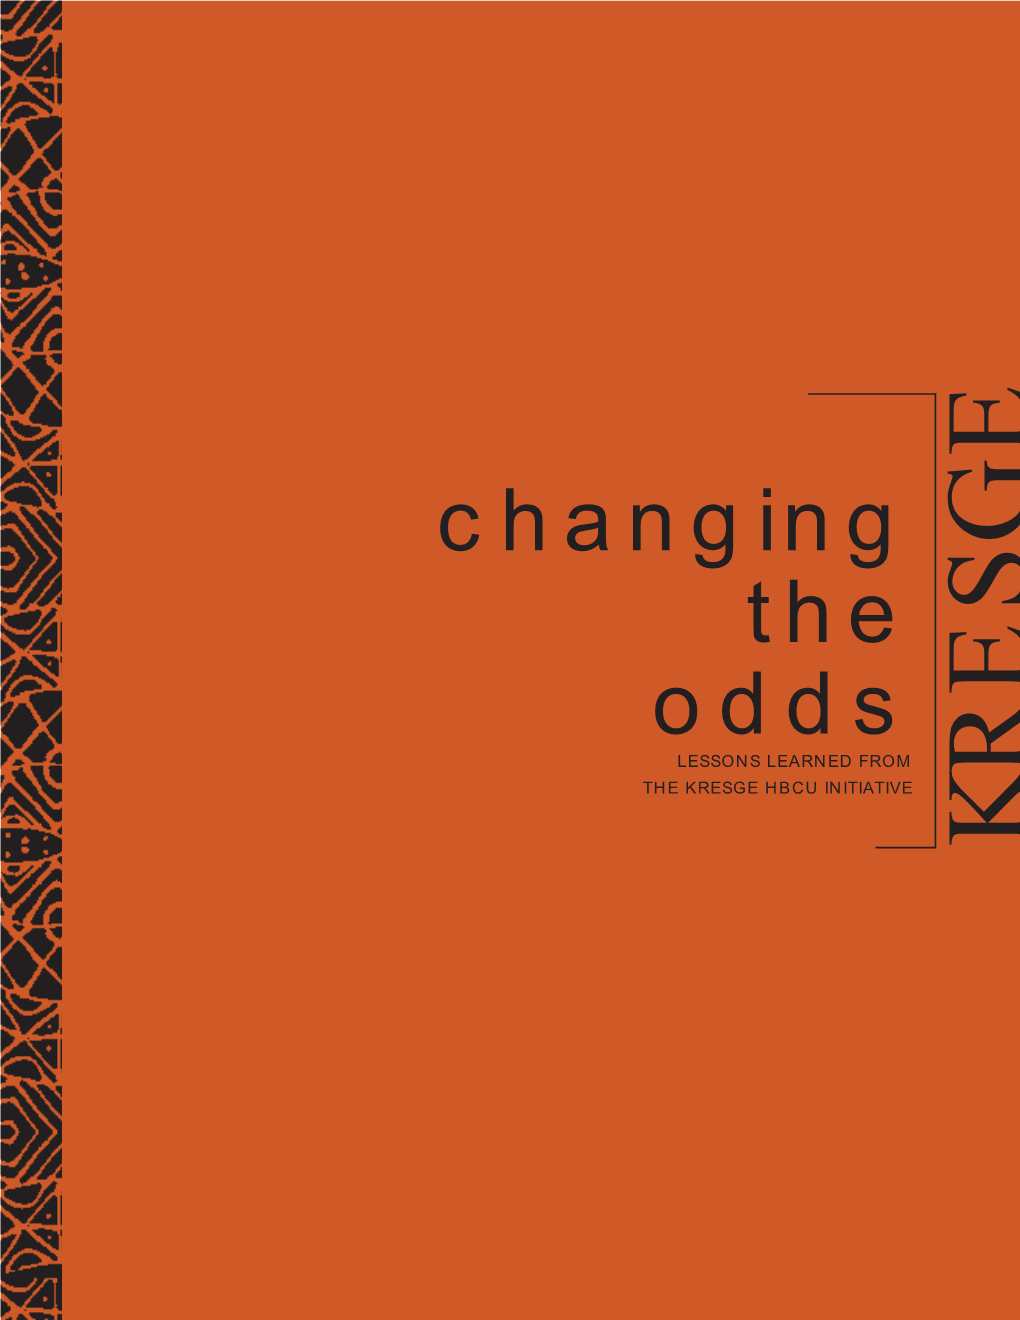 Changing the Odds: Lessons Learned from the Kresge HBCU Initiative